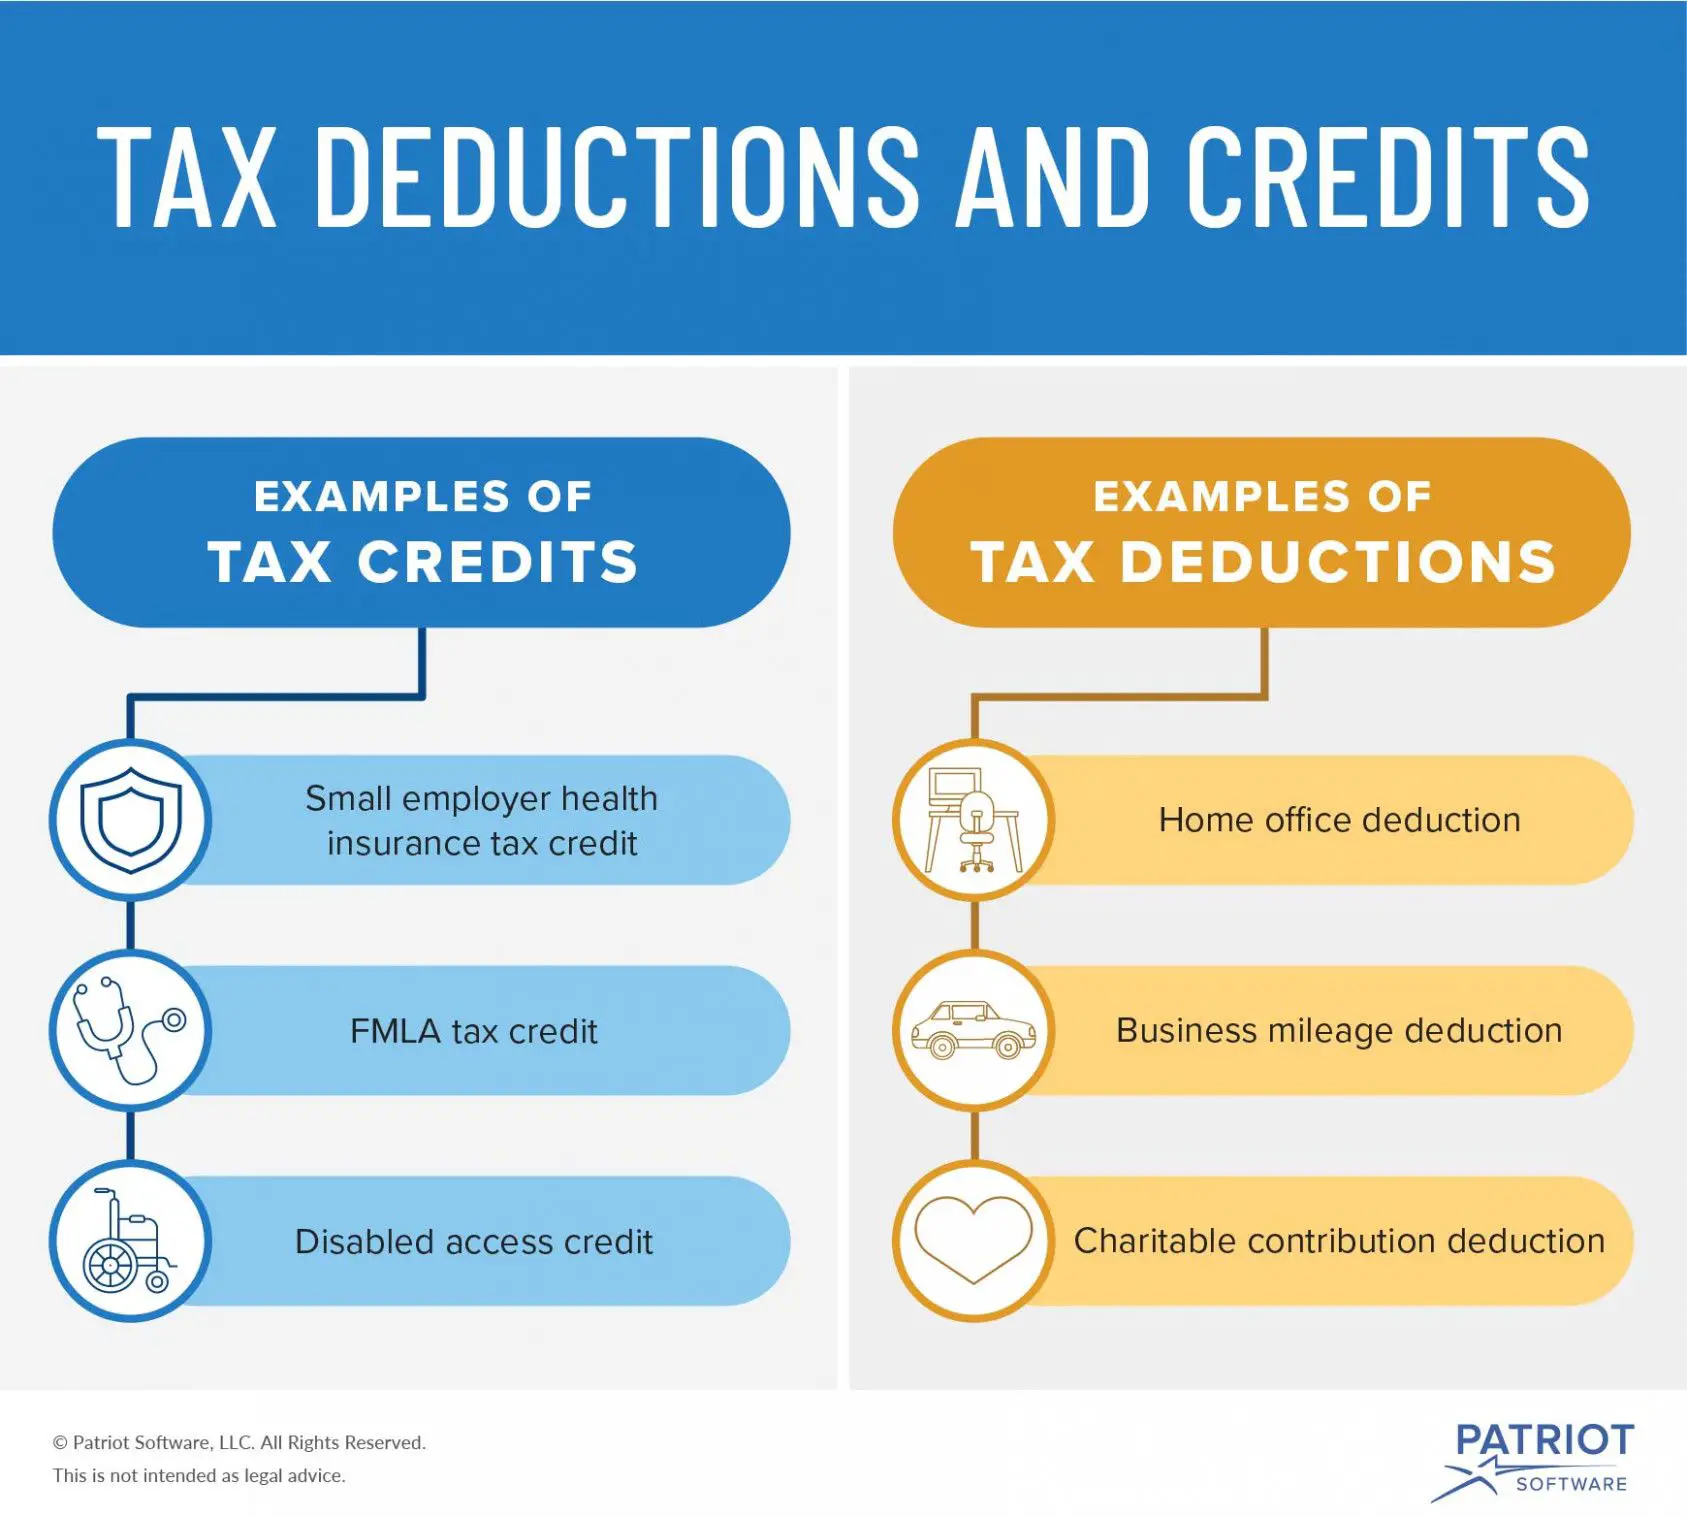 Tax Deductions And Credits 2020